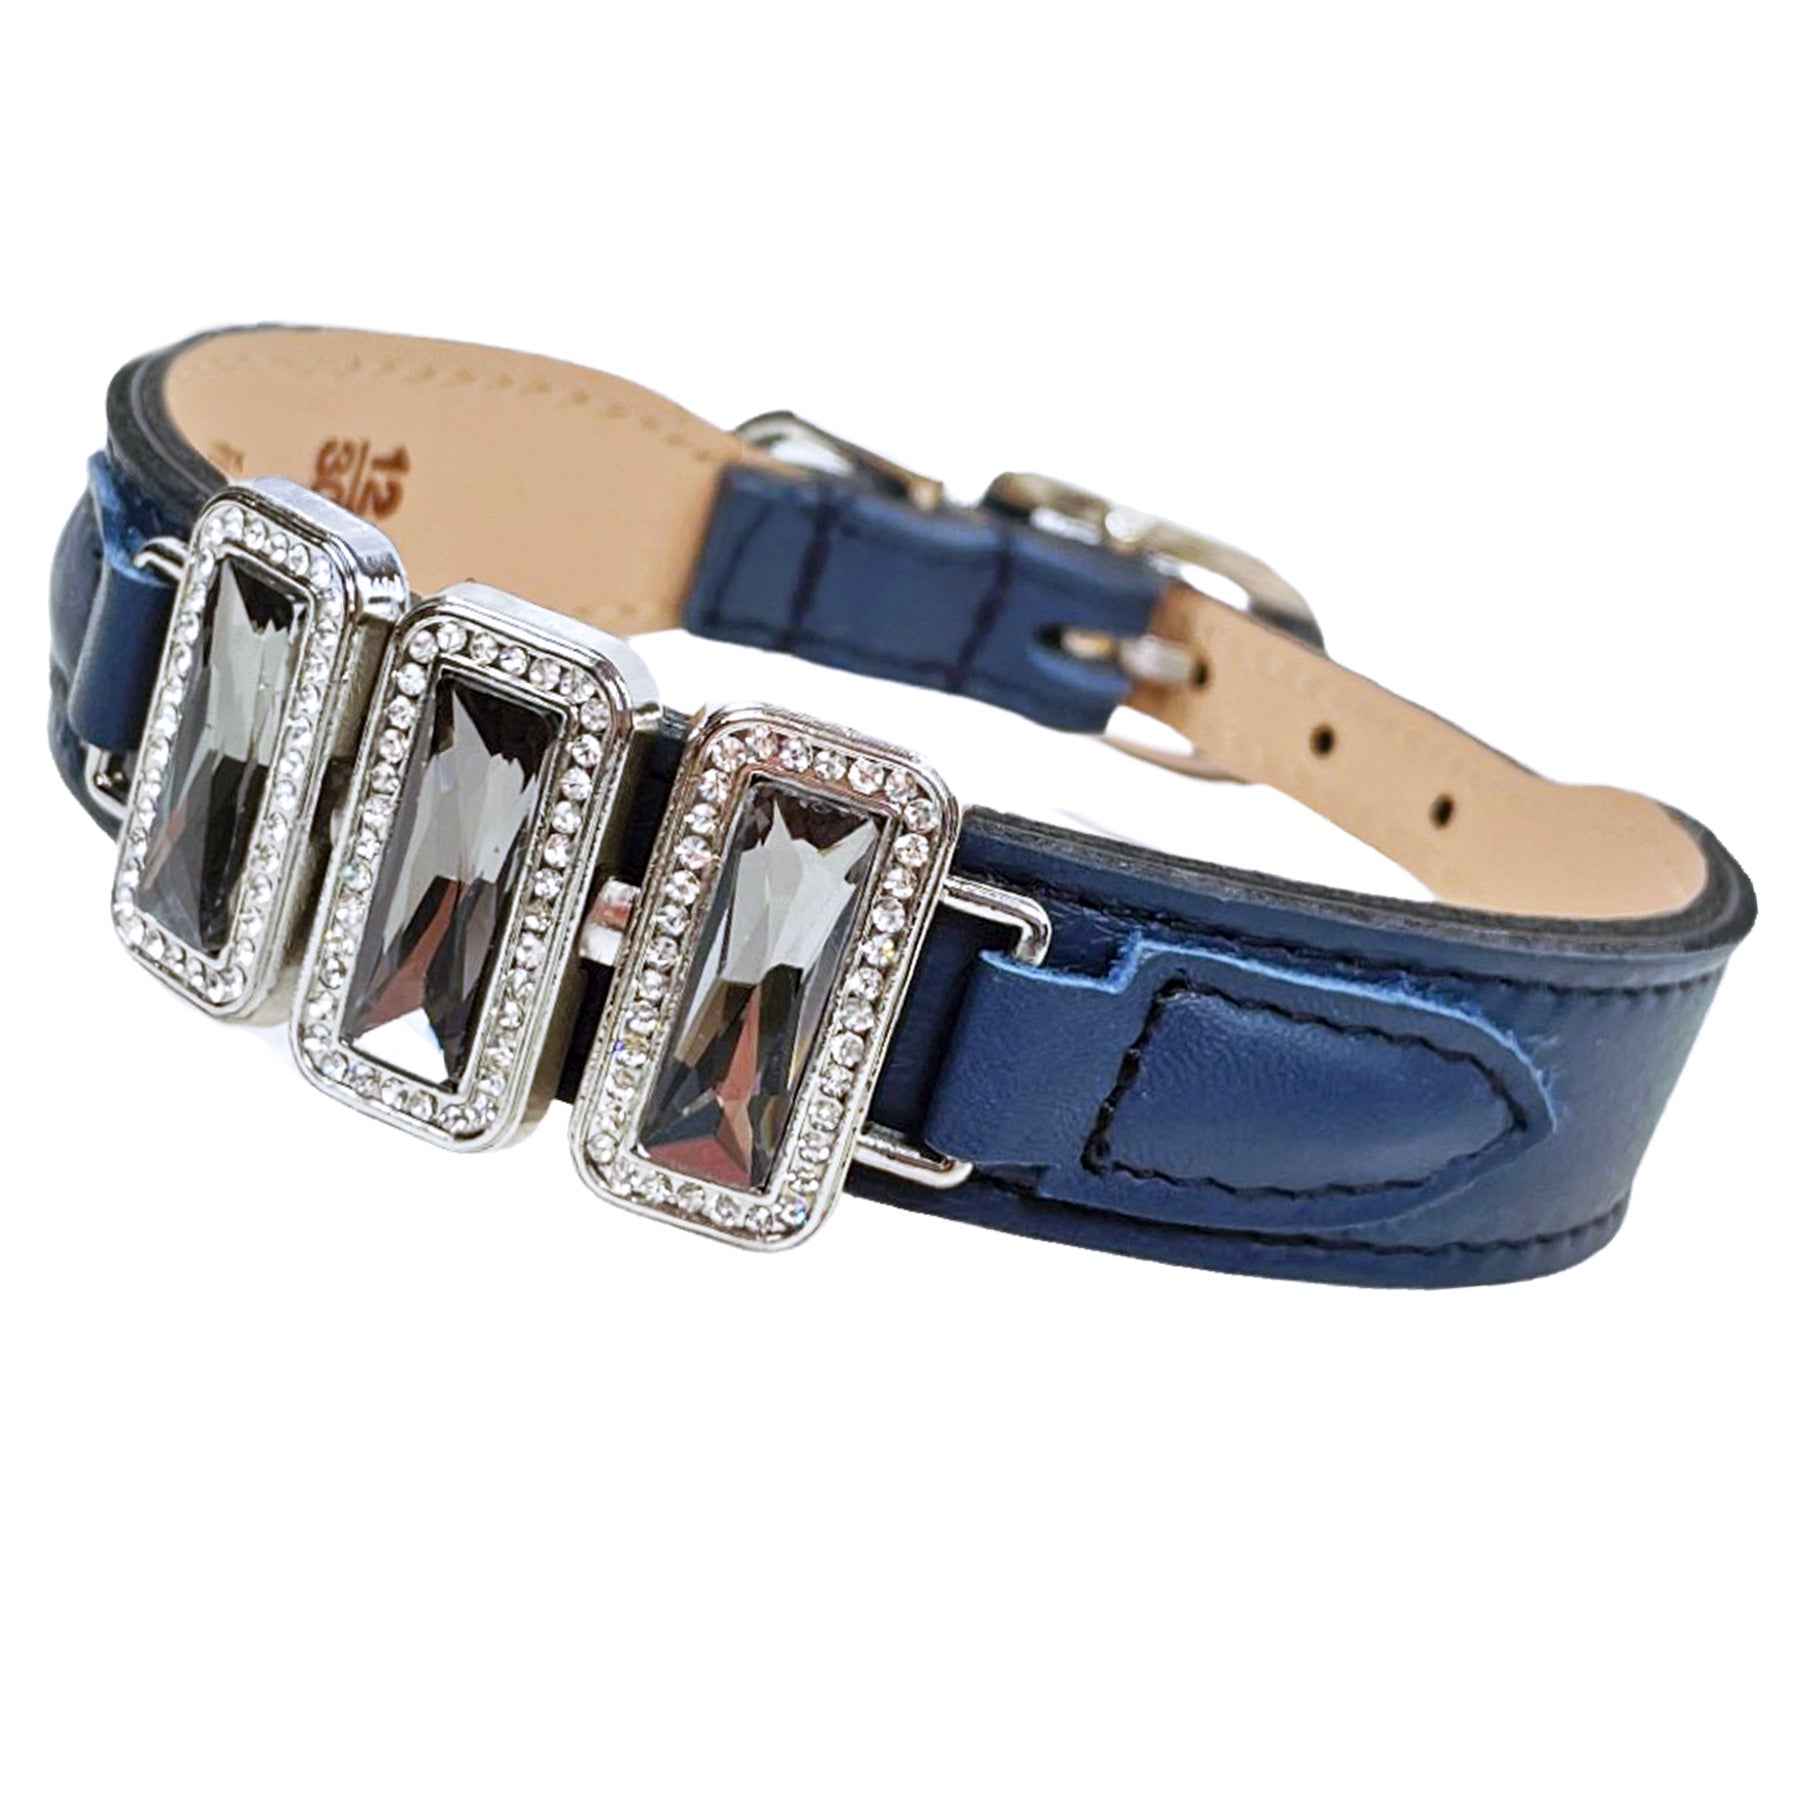 Imperial Collection in French Navy & Nickel